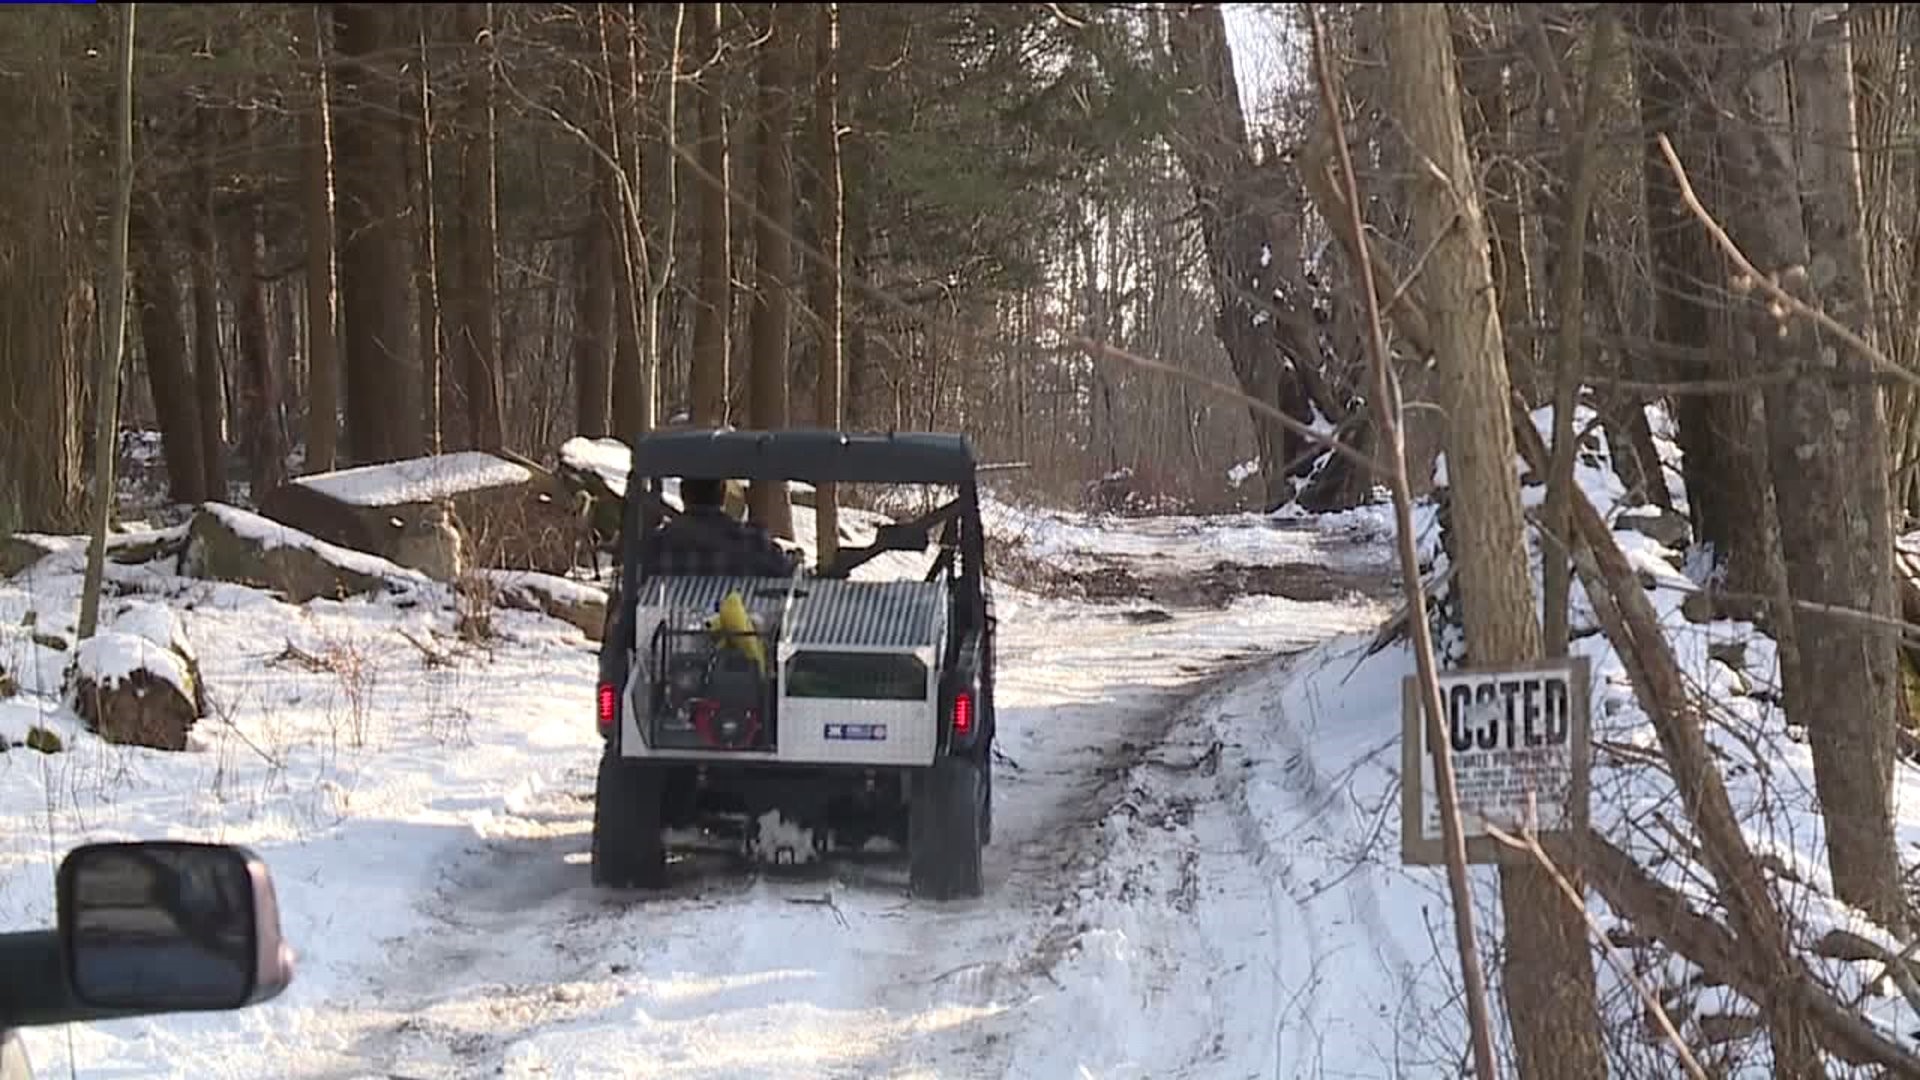 84-Year-Old Man Dies In Tree-Stand